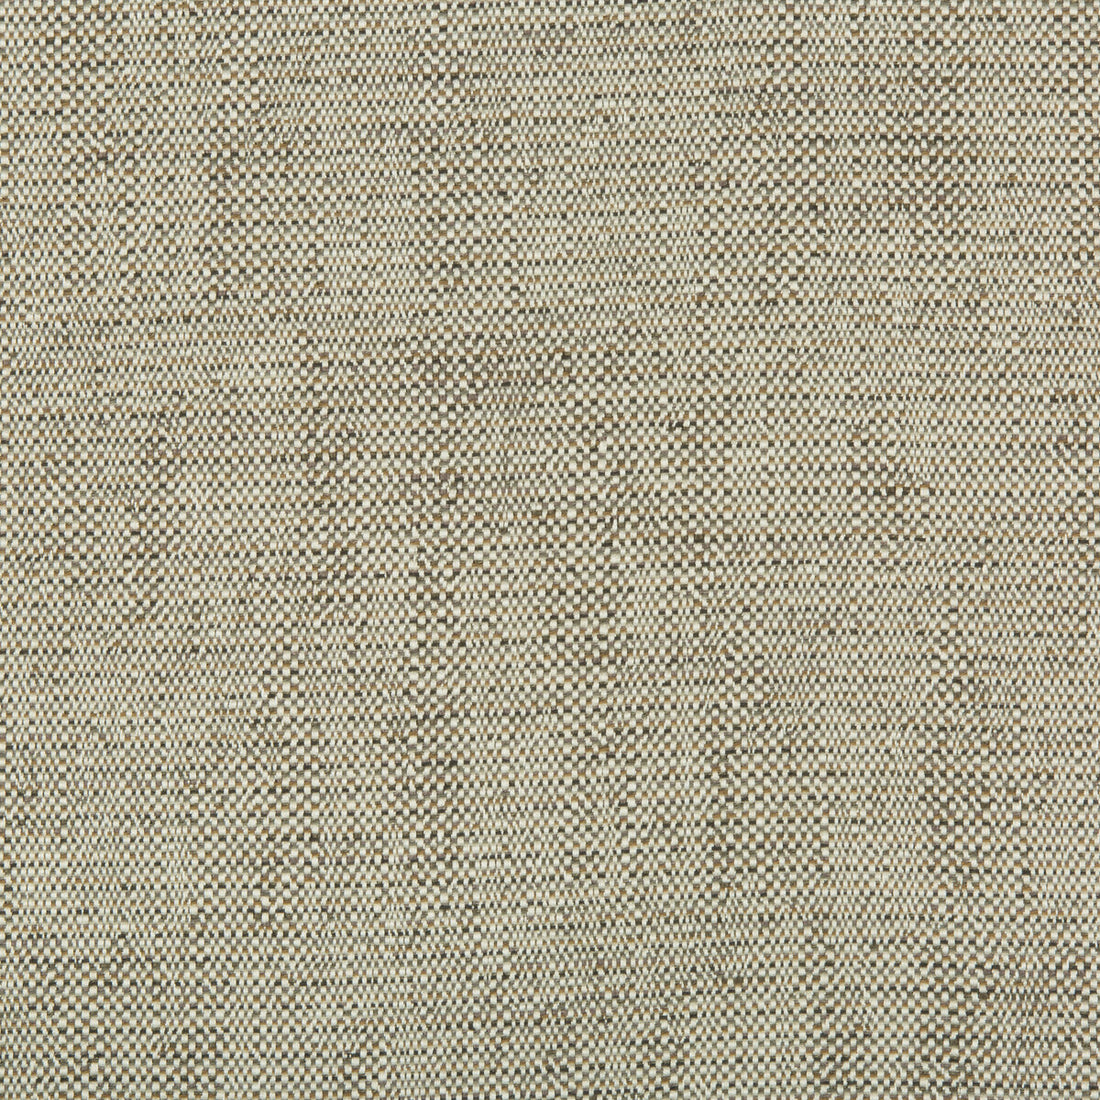 Kravet Contract fabric in 35132-1611 color - pattern 35132.1611.0 - by Kravet Contract in the Incase Crypton Gis collection